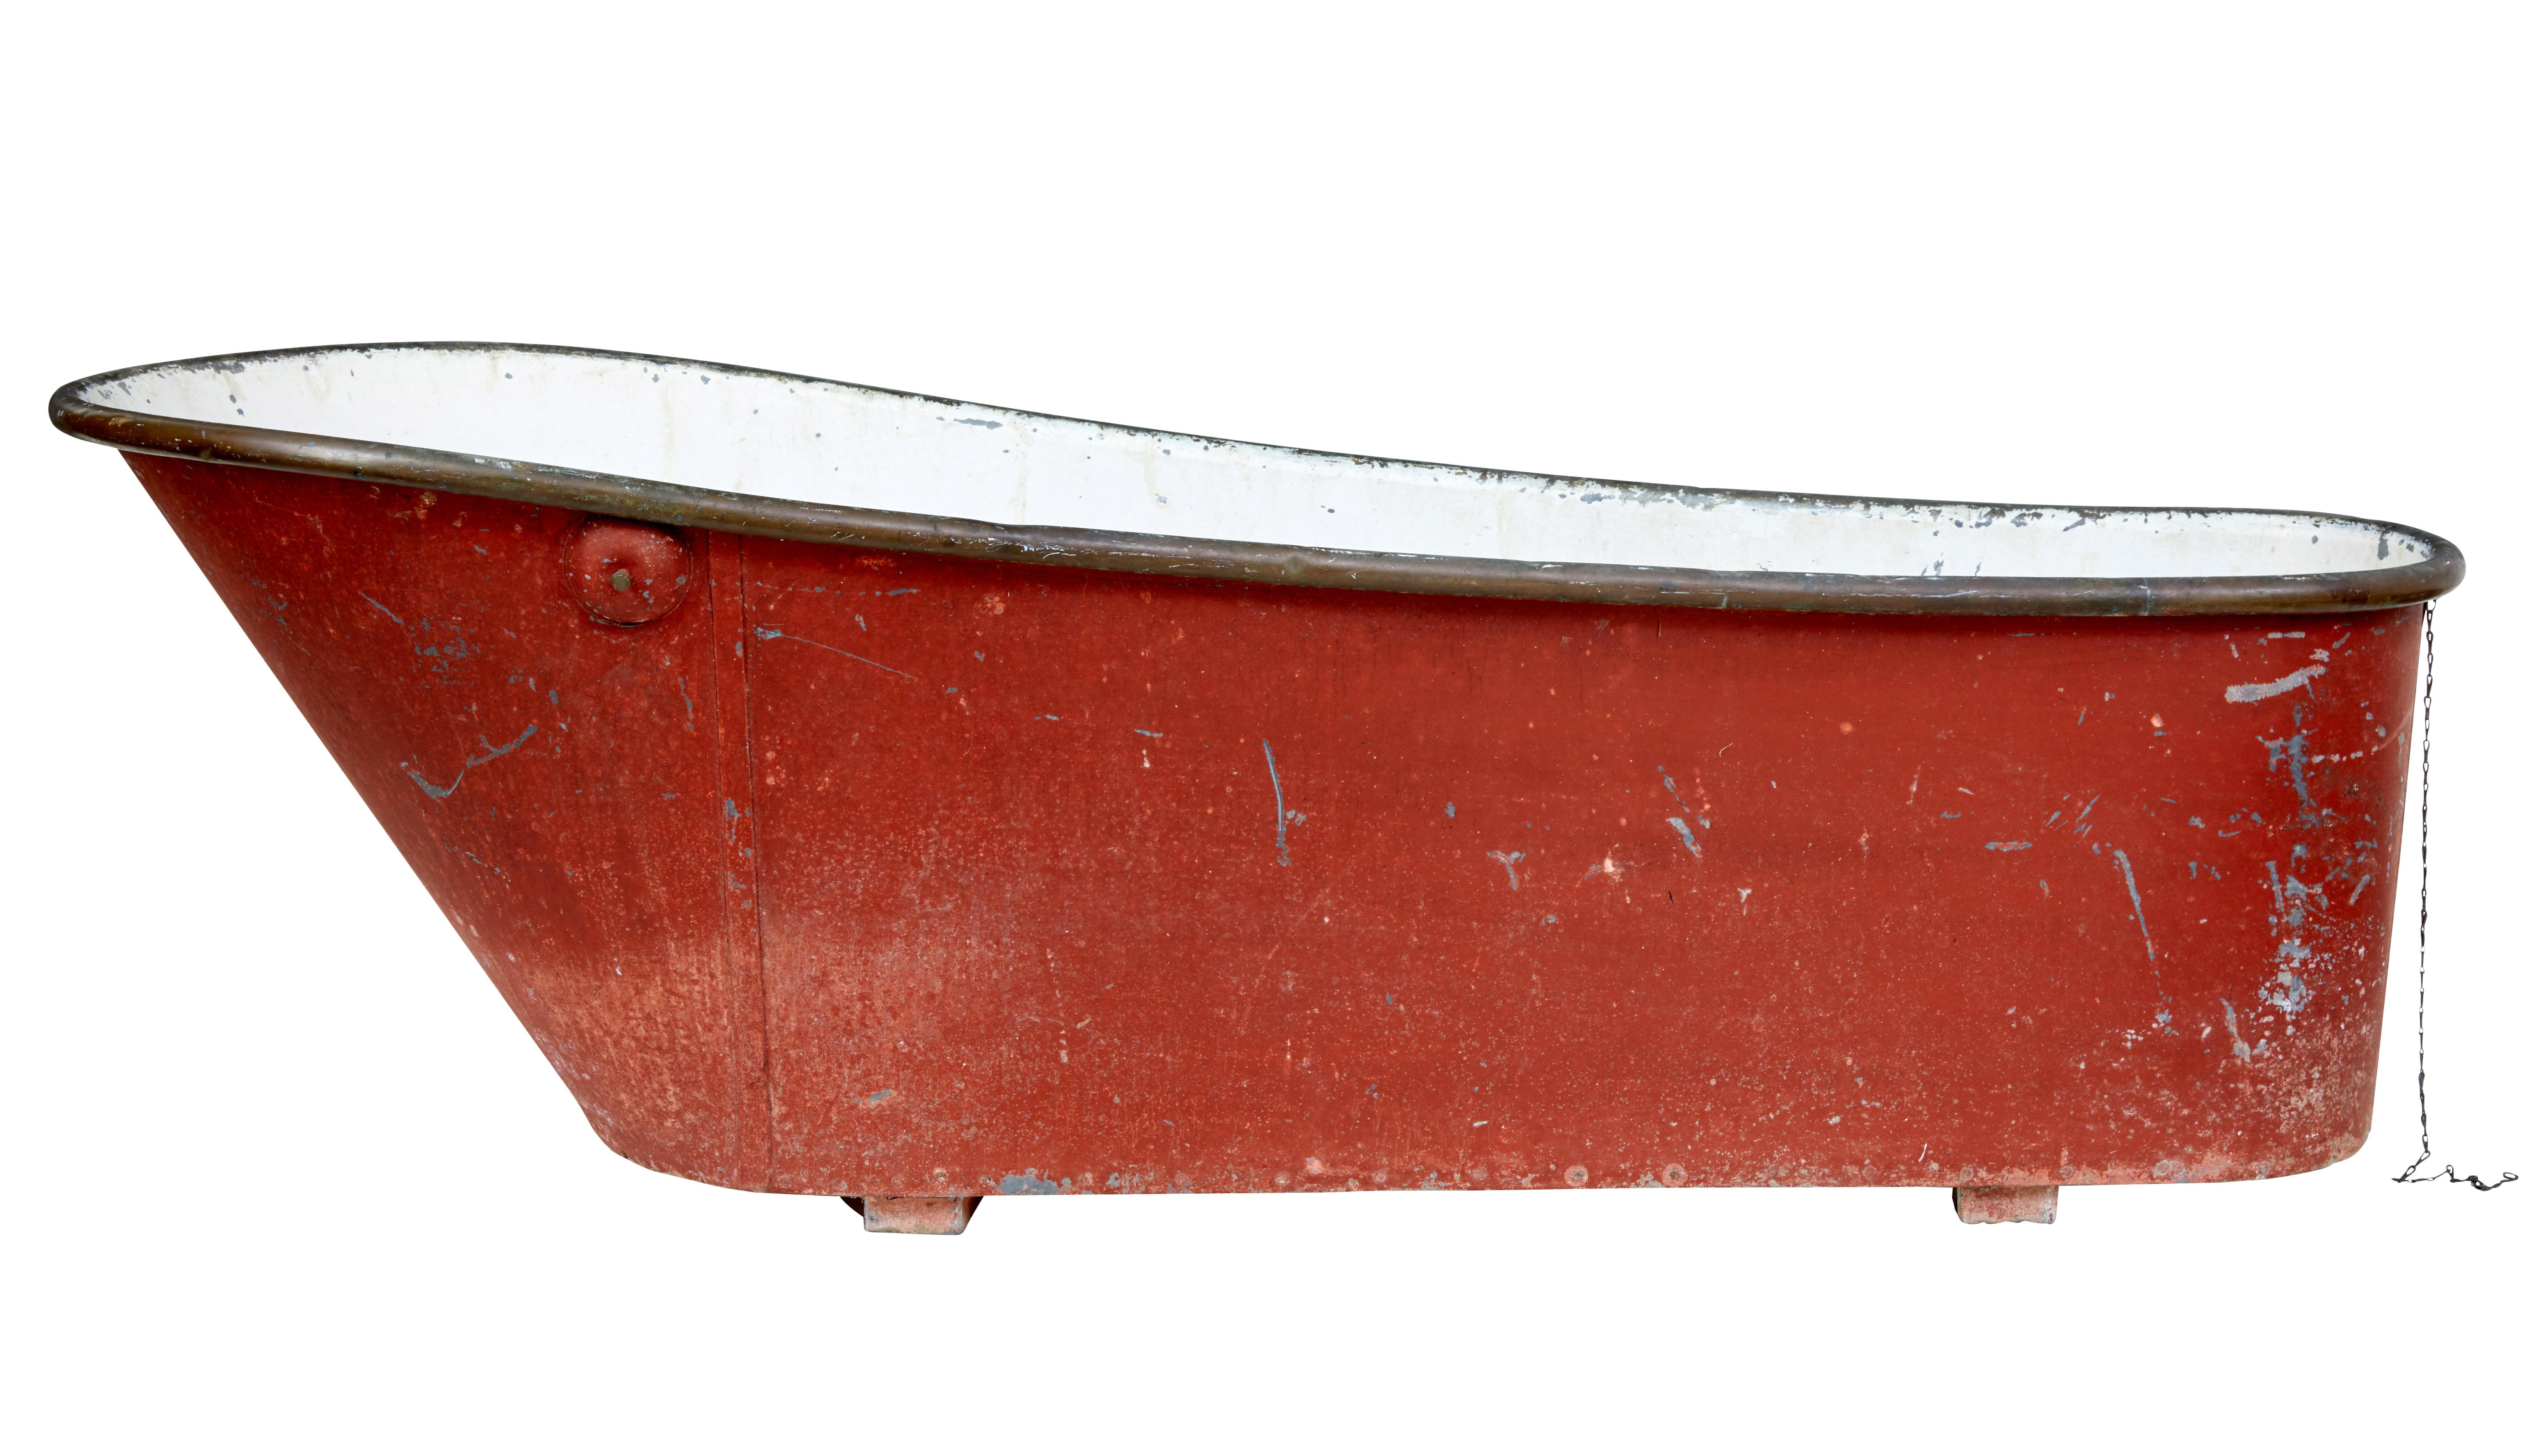 We are pleased to offer this rural Swedish bath tub in its original condition, circa 1890.

Painted a burnt red on the outside and white on the inside. Thick tin bath with copper rolltop edge.

Beautifully shaped back rest for comfort. Plug hole